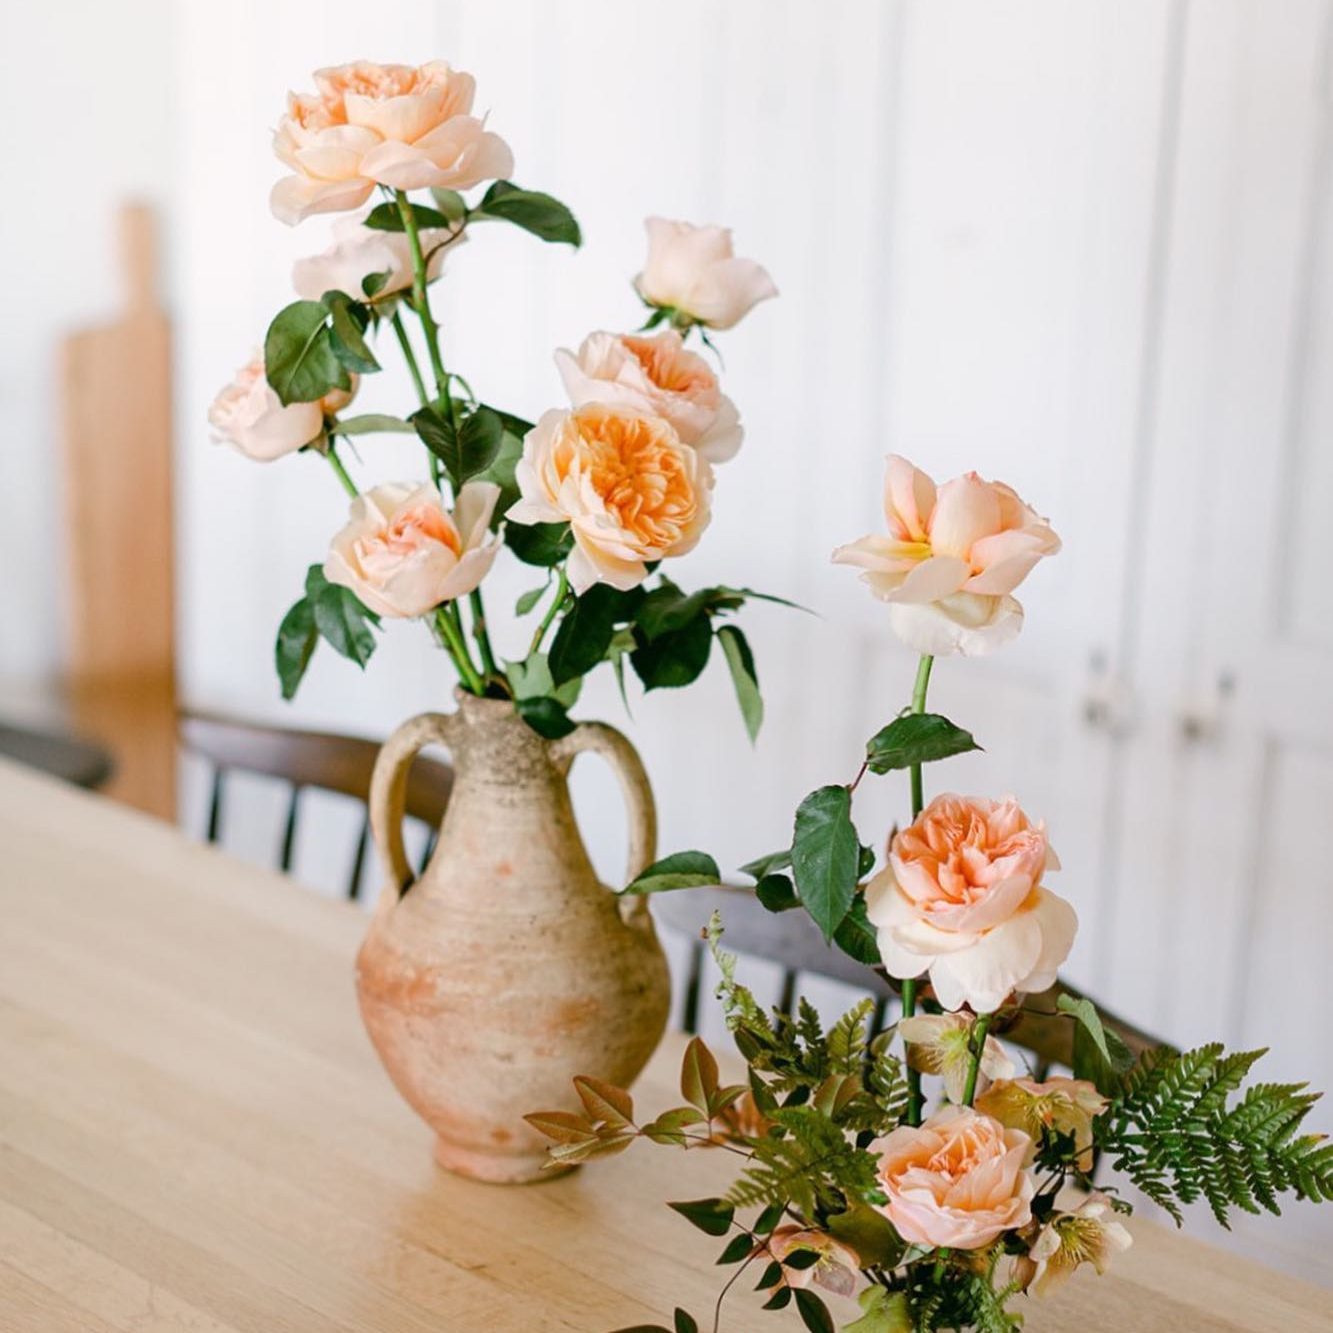 30 Simple Flower Arrangement Ideas That Anyone Can Create at Home